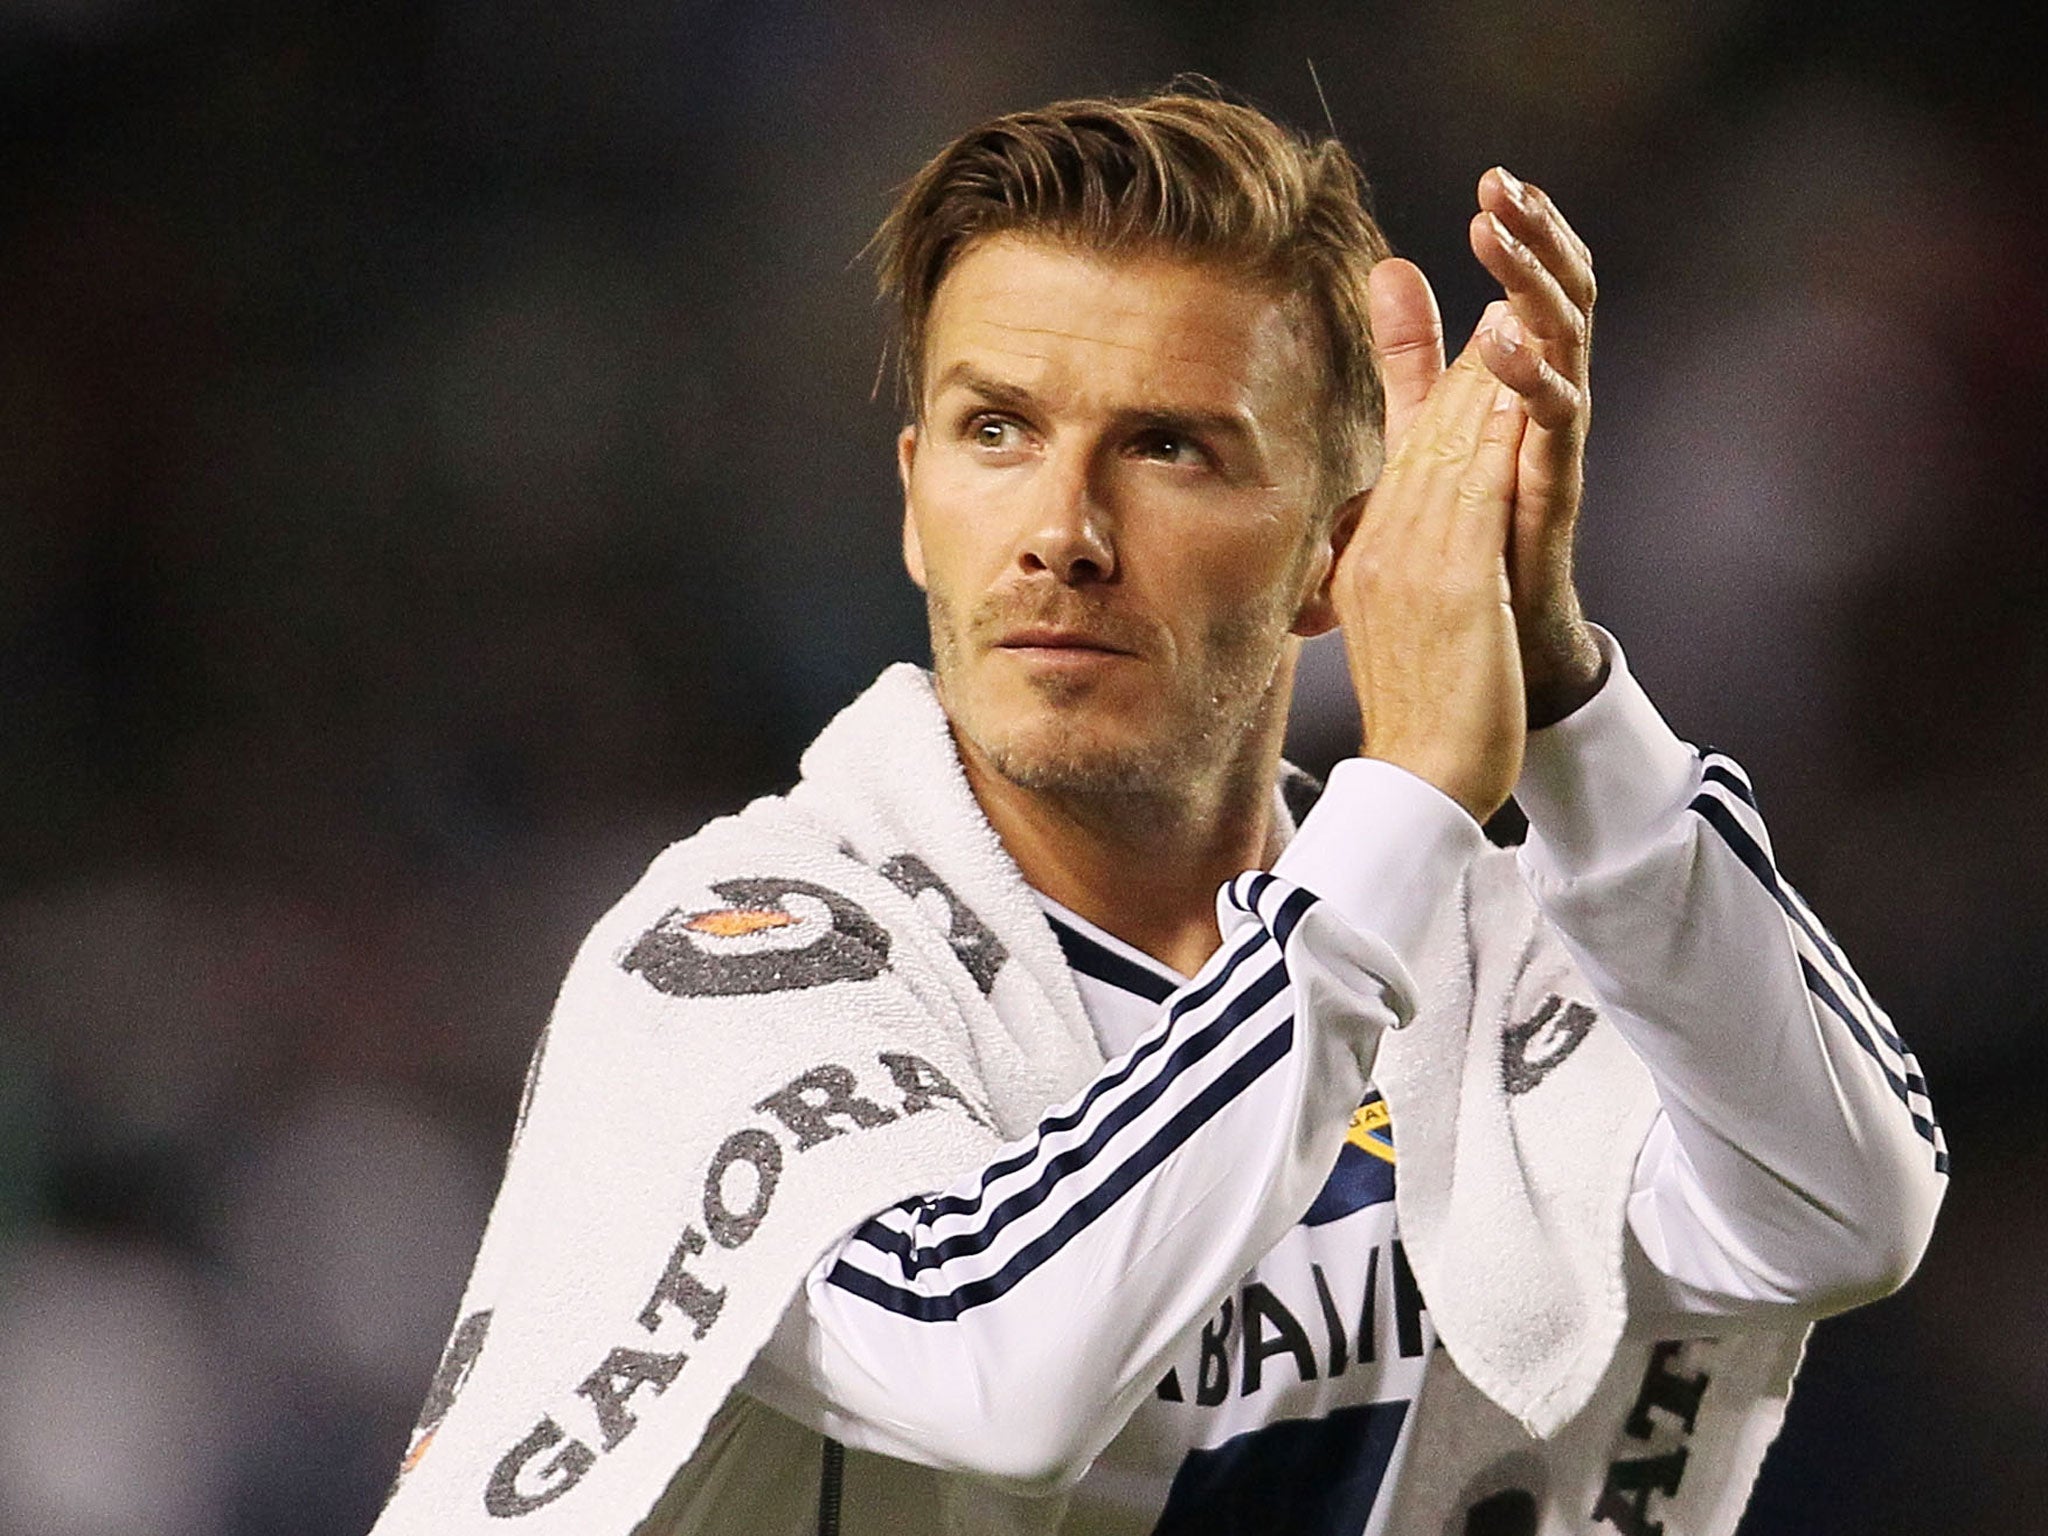 His final game will take place at the Galaxy's own Home Depot Center, where he arrived on the American stage as the first designated player in MLS back in 2007.